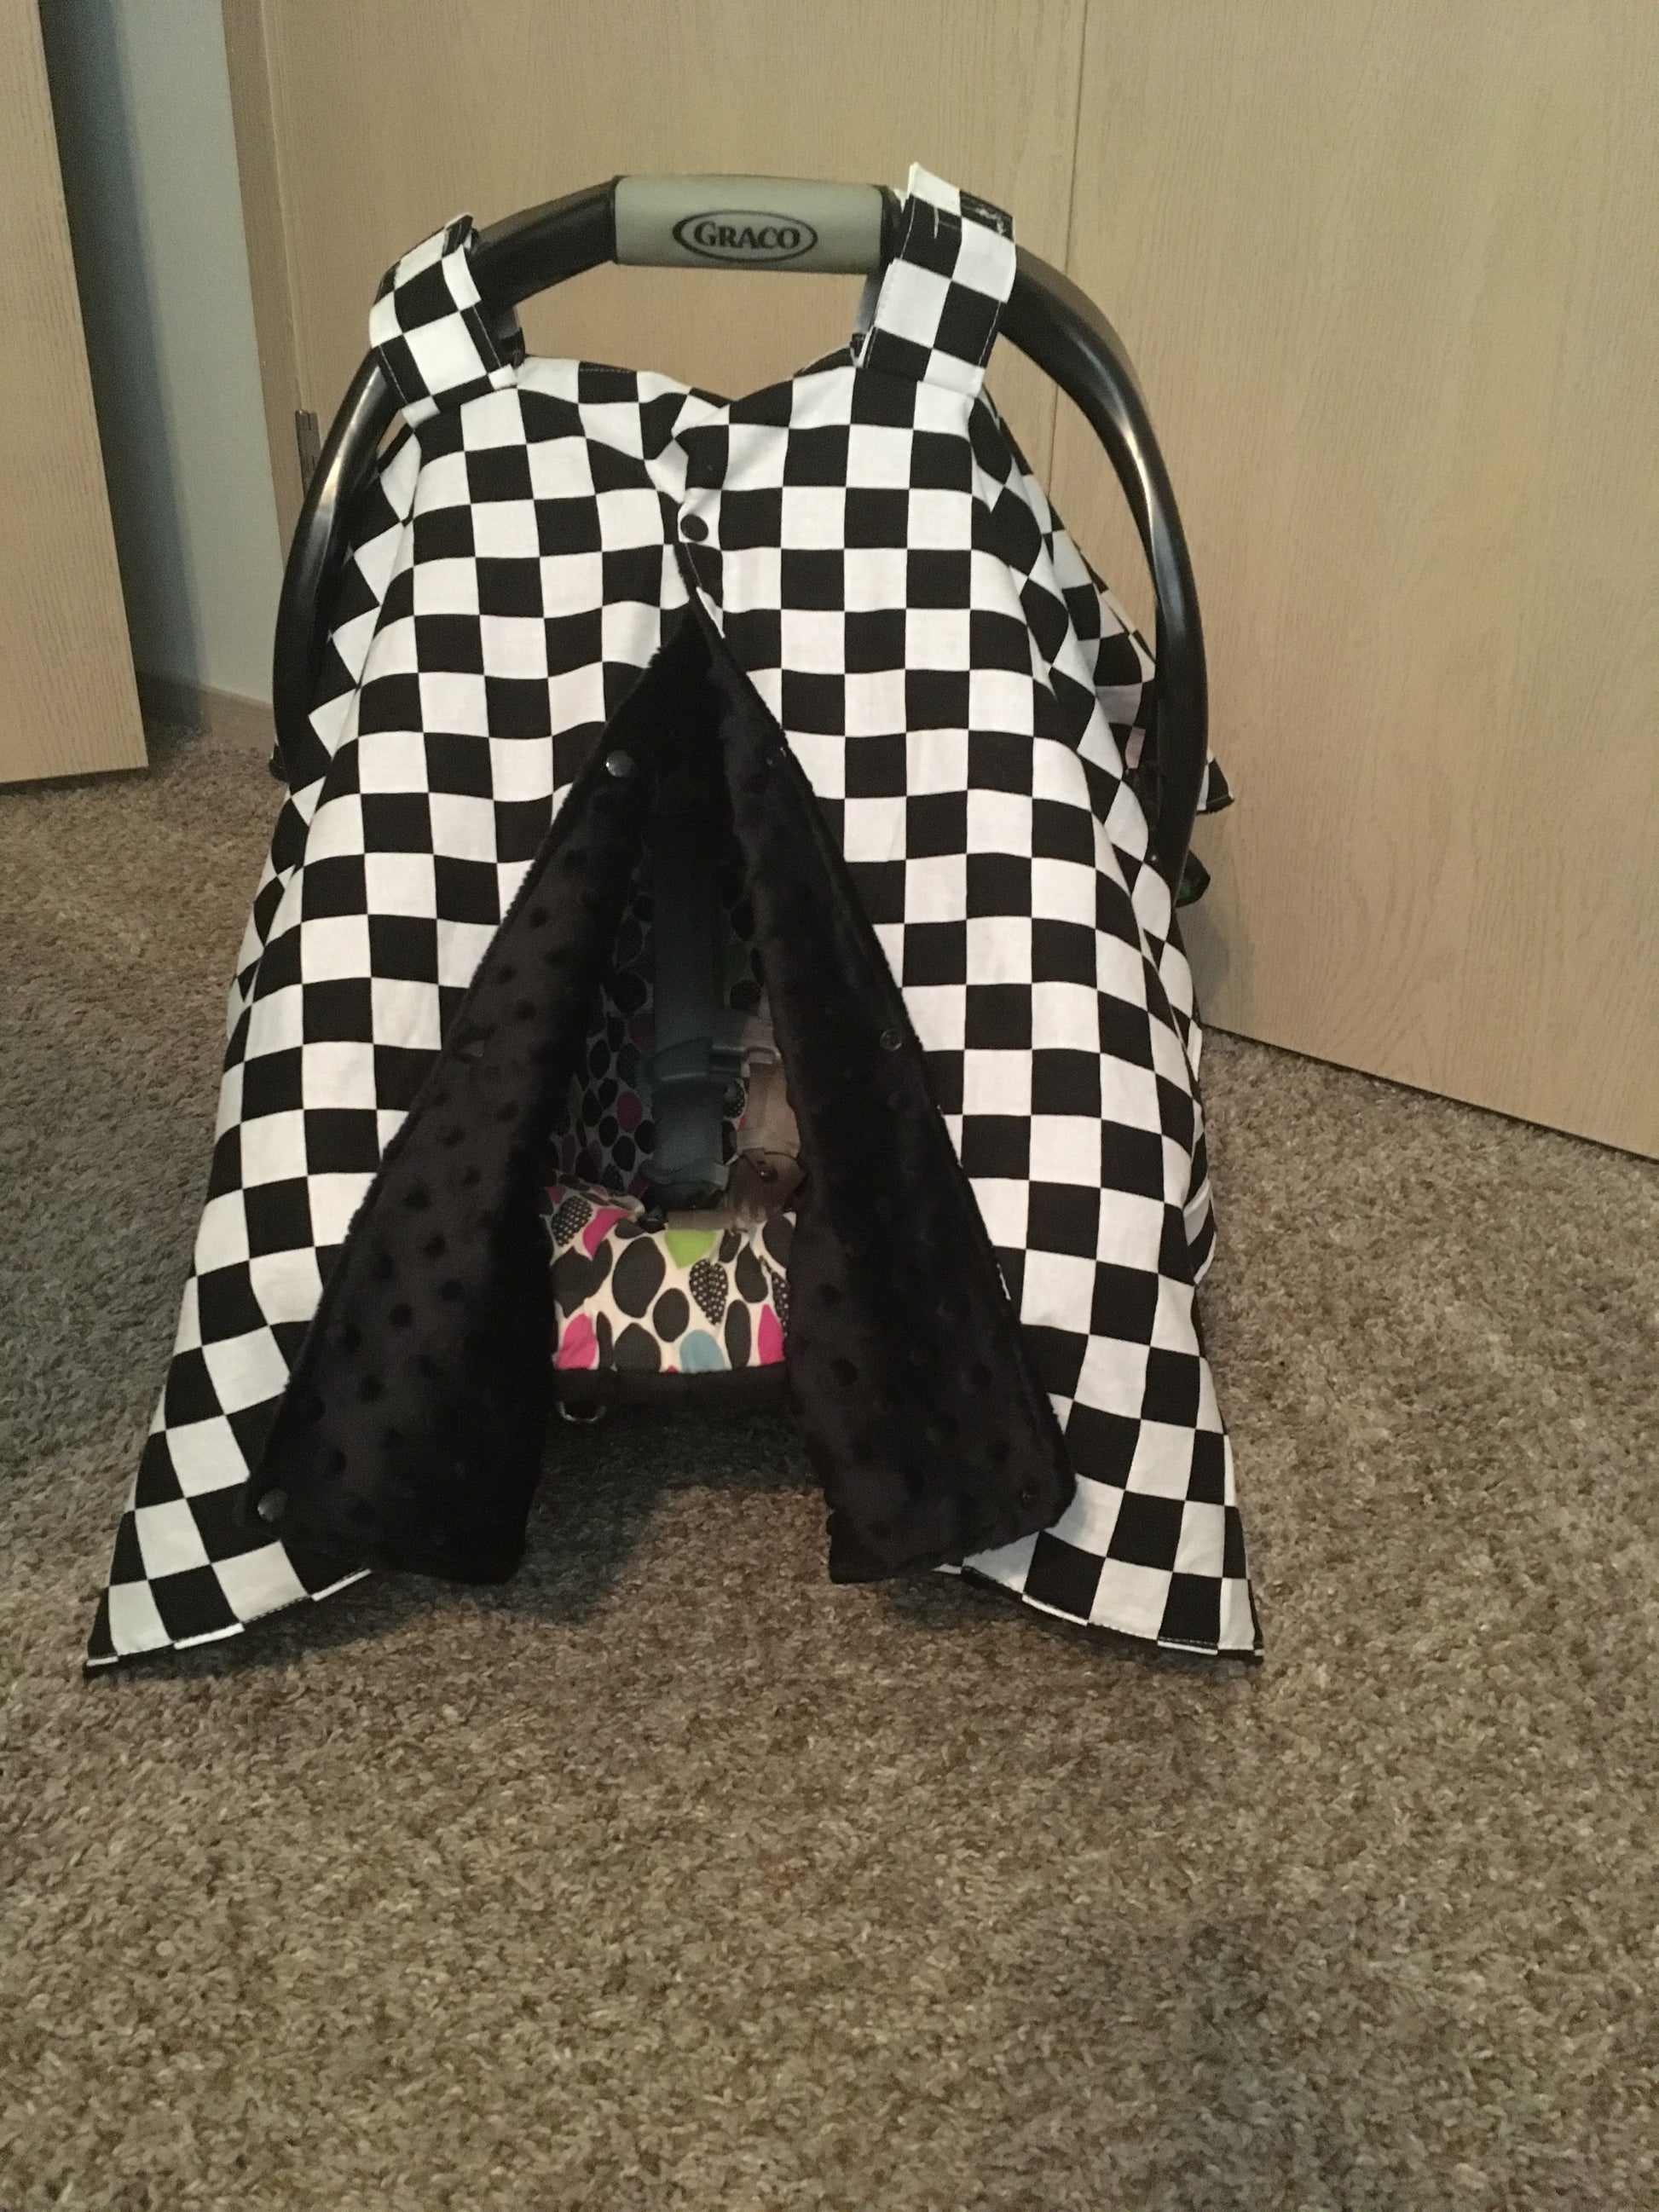 racing check car seat canopy shown in black minky, in the open option